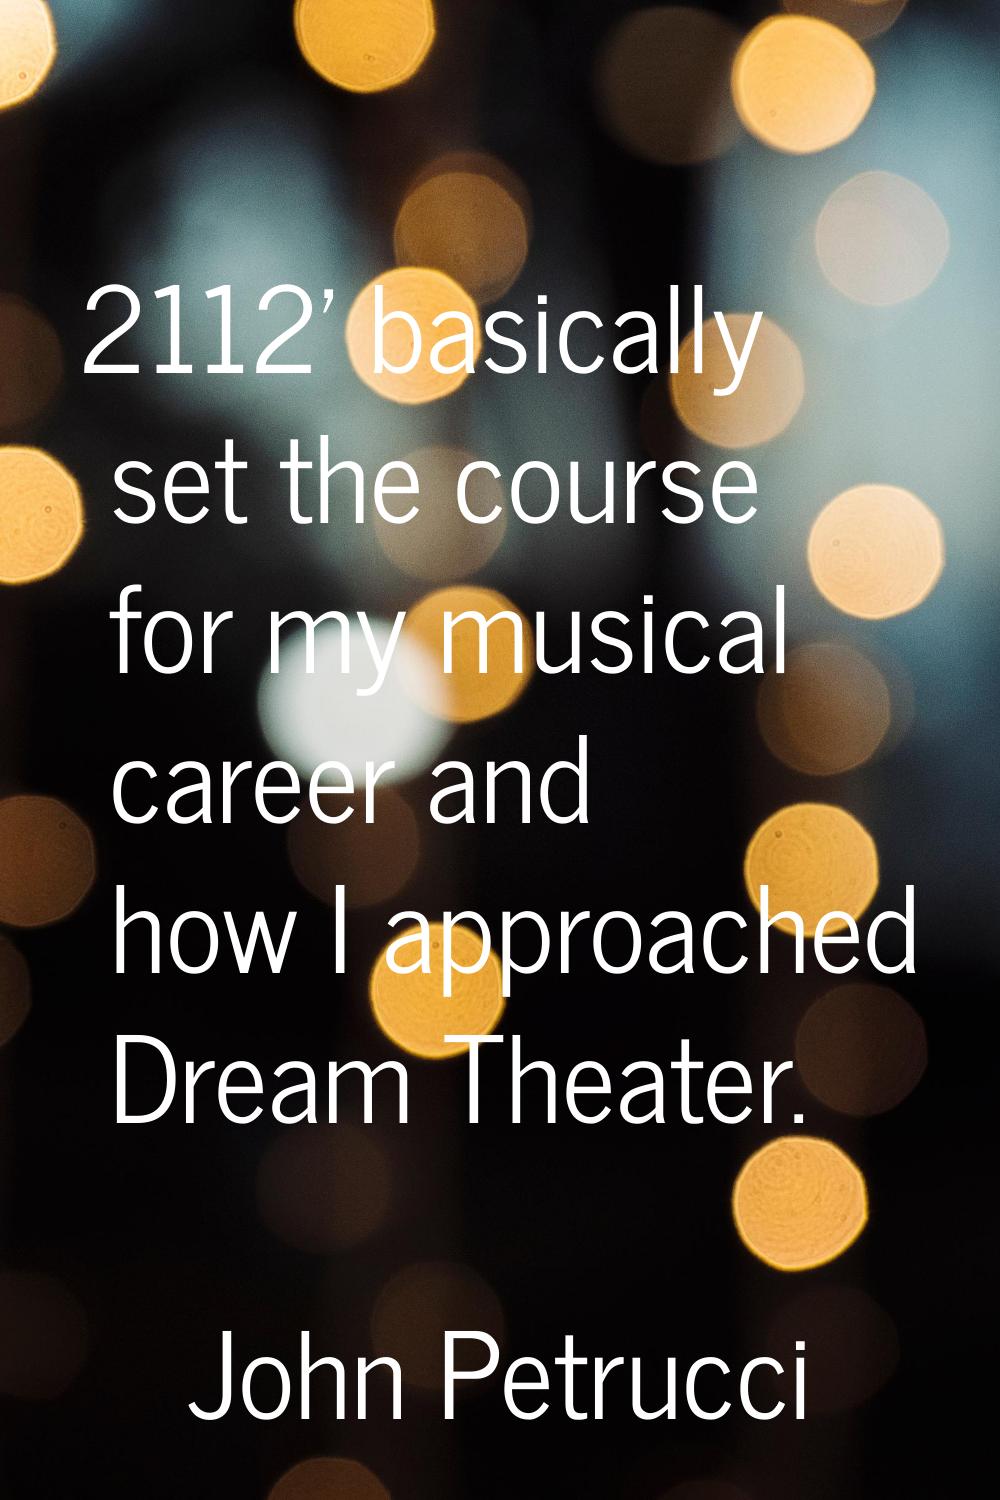 2112' basically set the course for my musical career and how I approached Dream Theater.